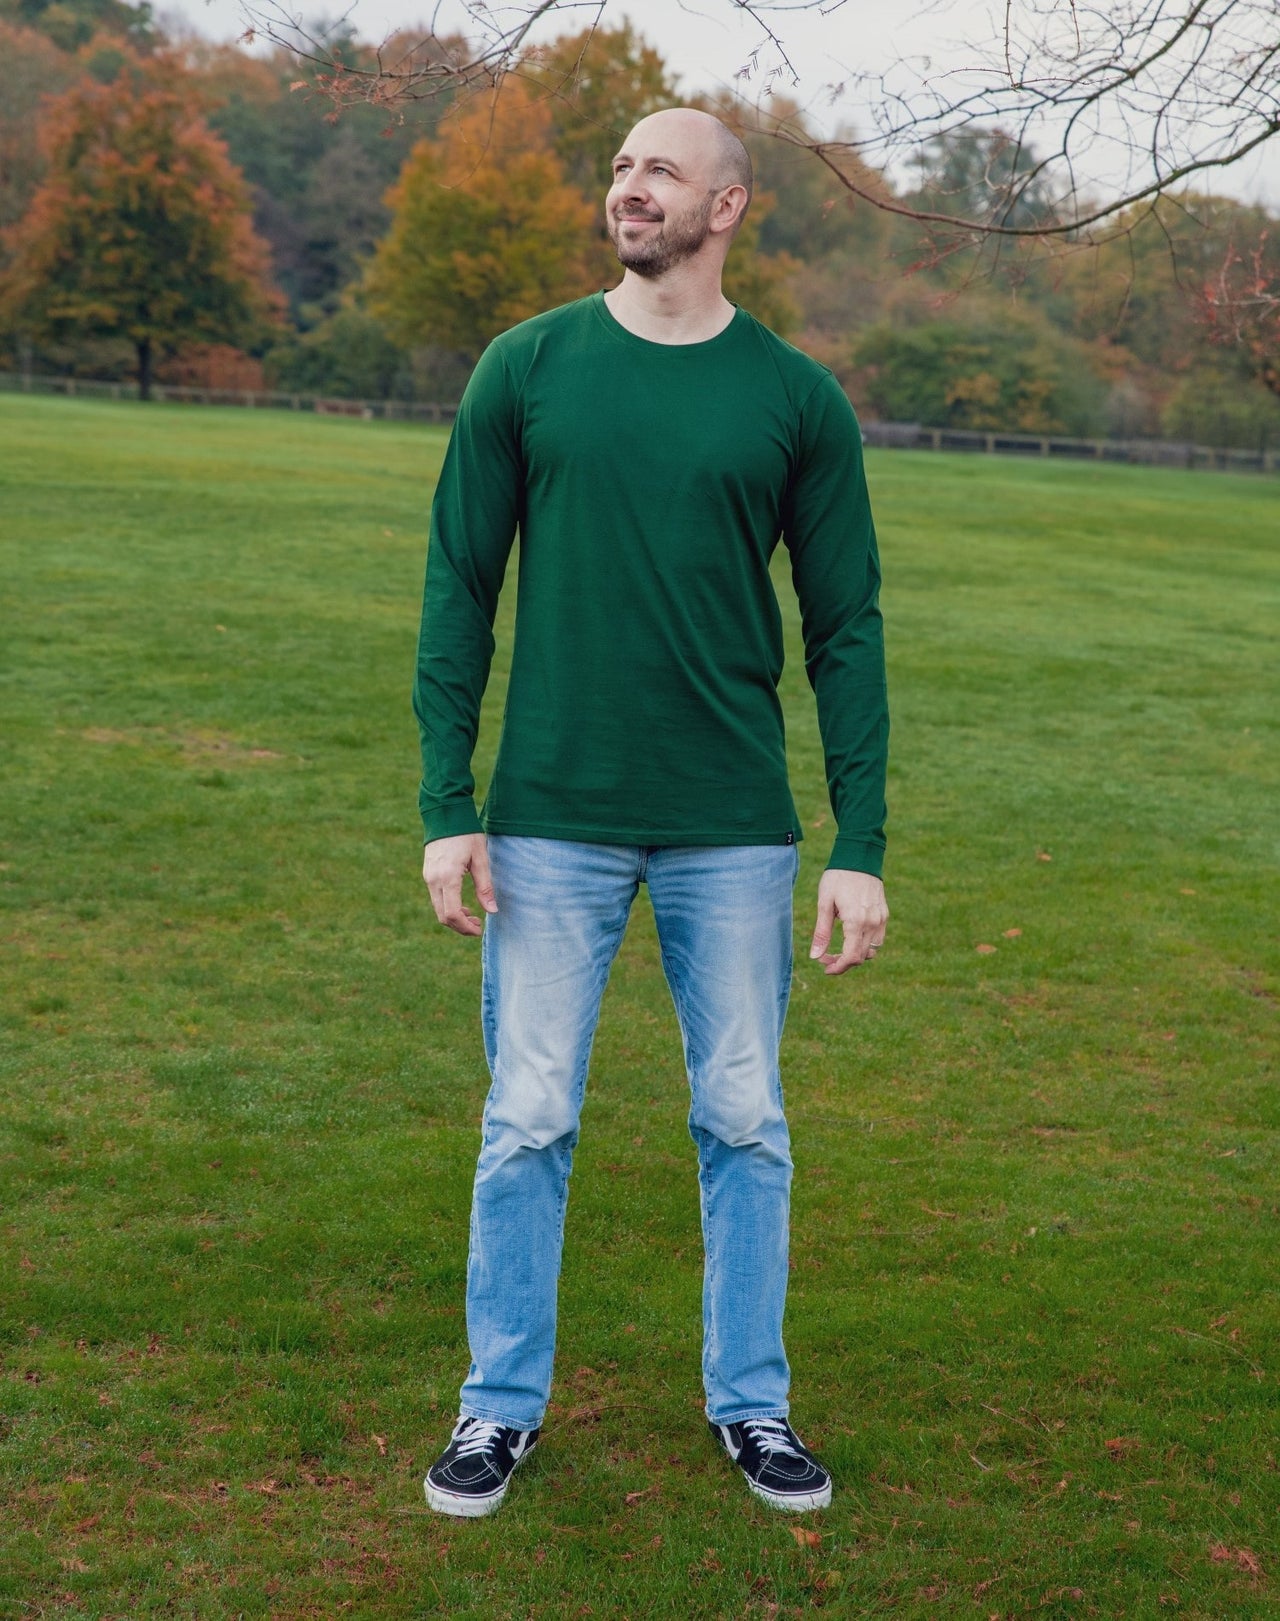 A head to toe shot of a tall athletic guy in a park, looking up at the sky and wearing a dark green long sleeve tall t-shirt.